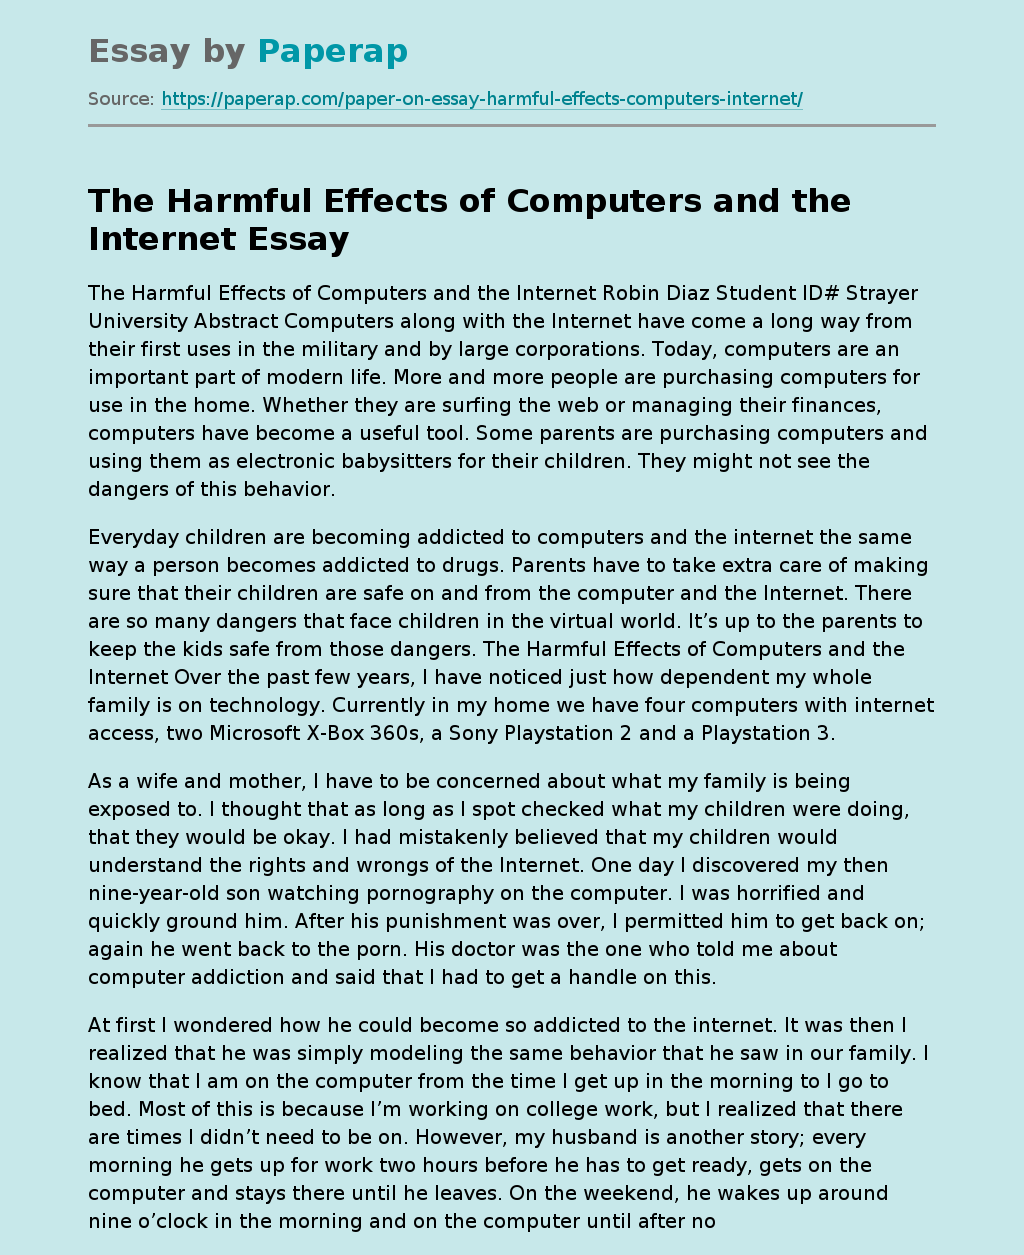 The Harmful Effects of Computers and the Internet